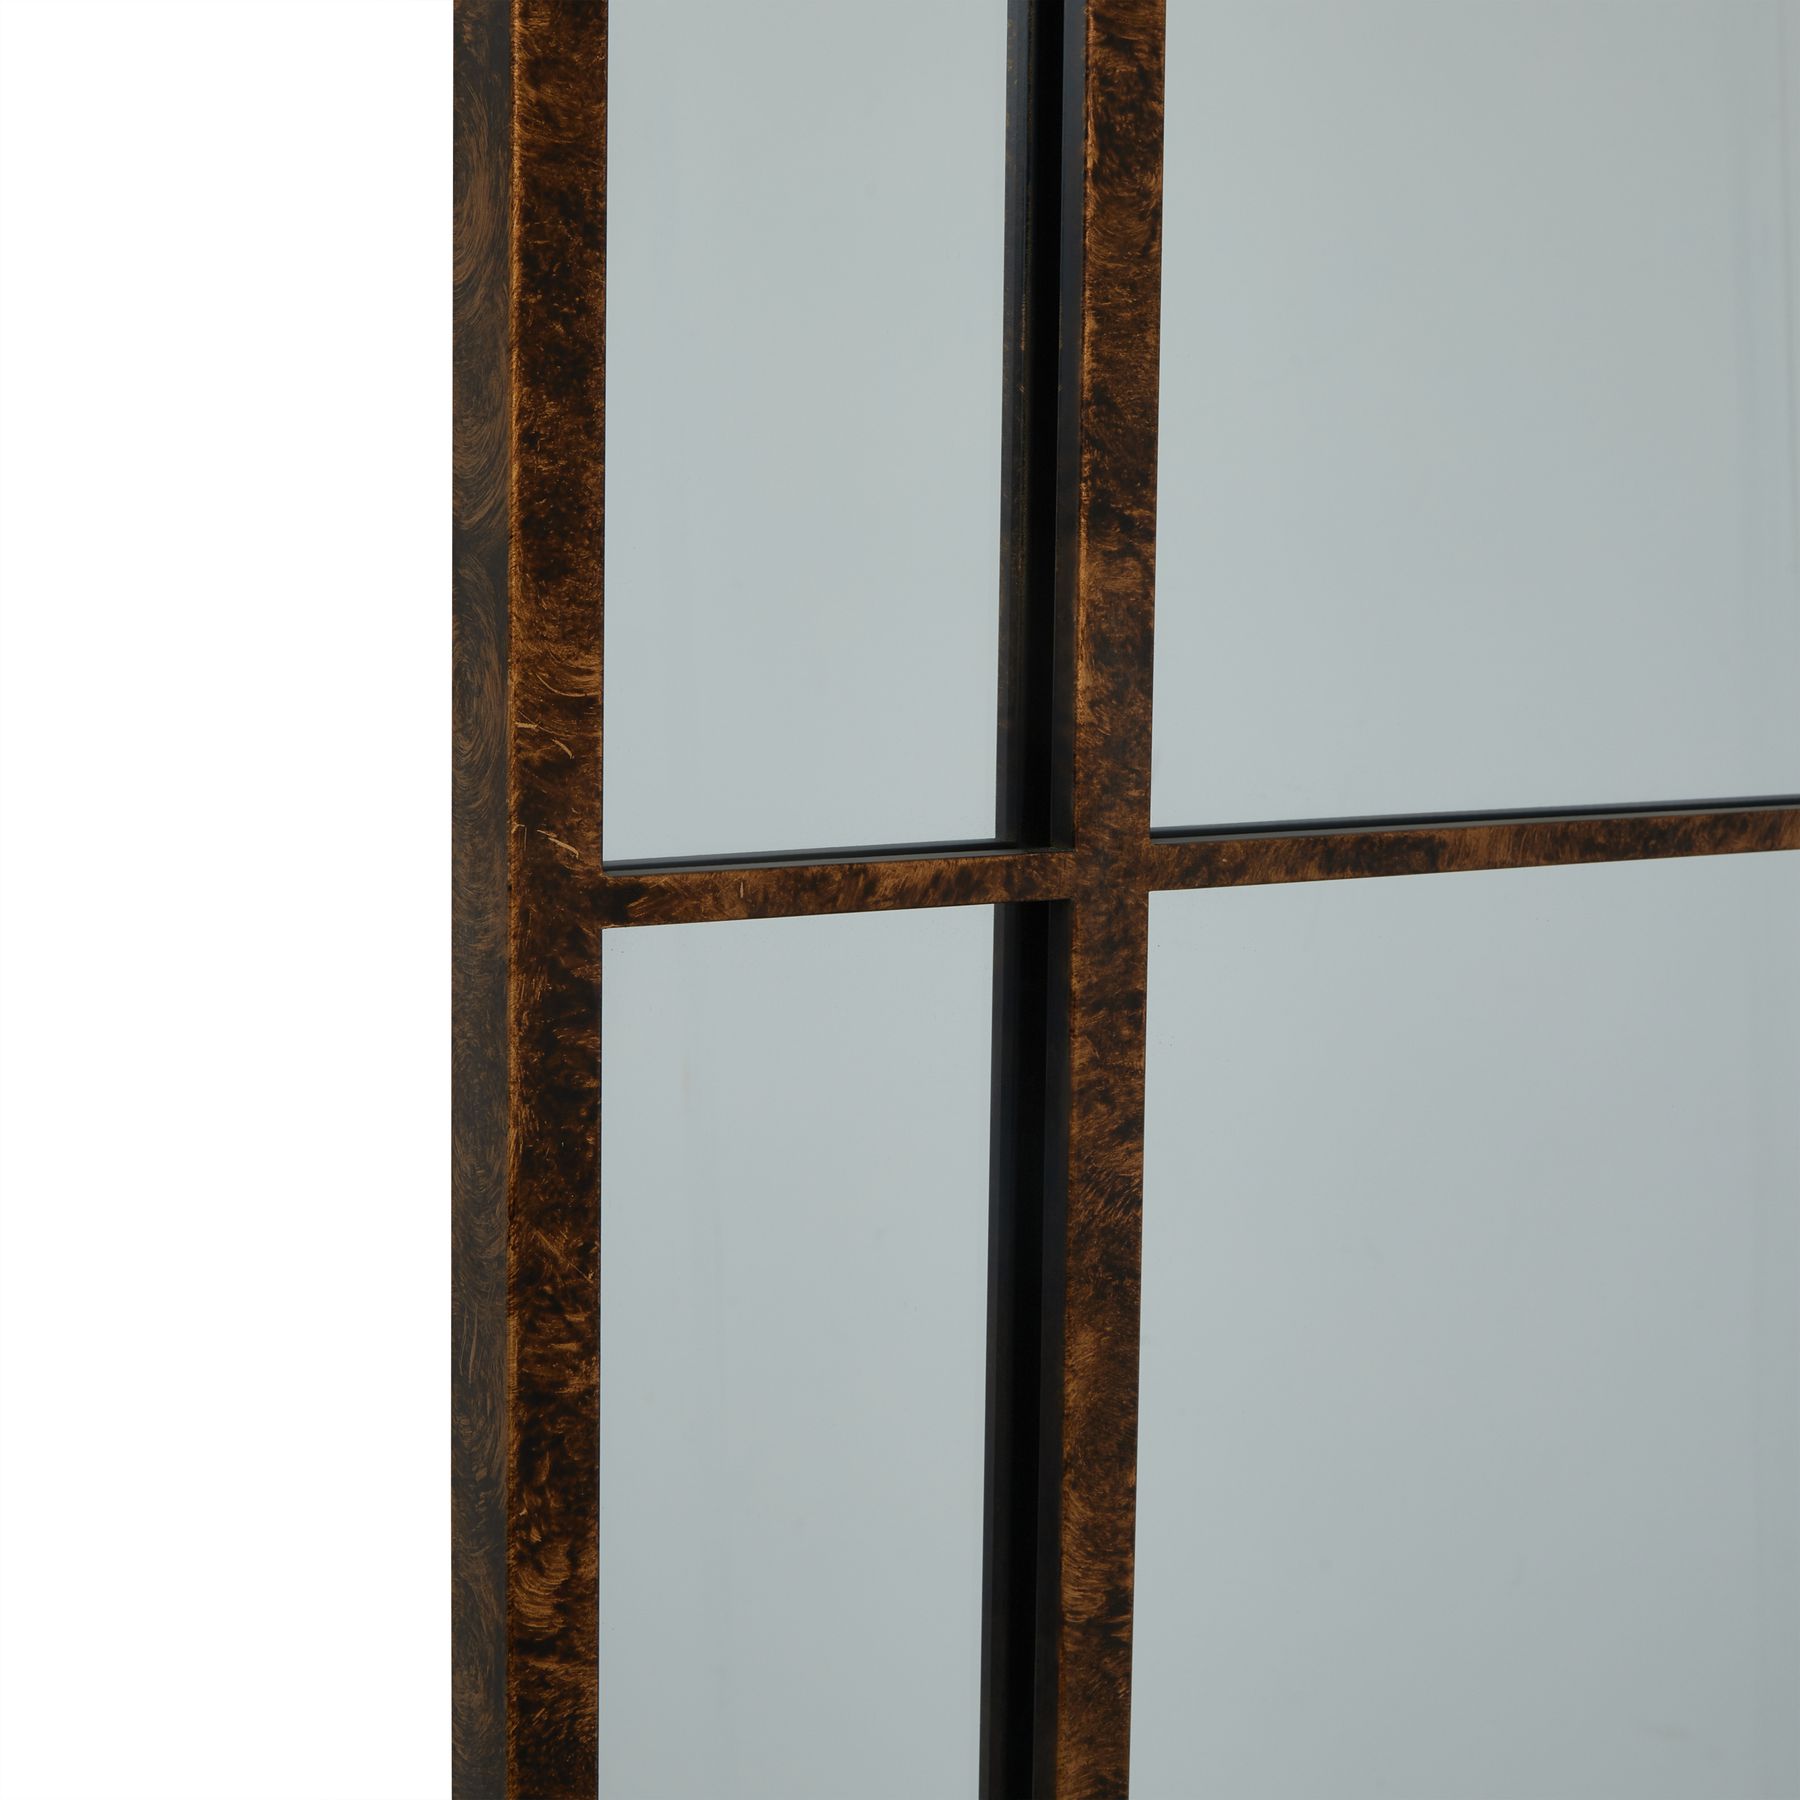 Rust Effect Large Arched Window Mirror - Image 3